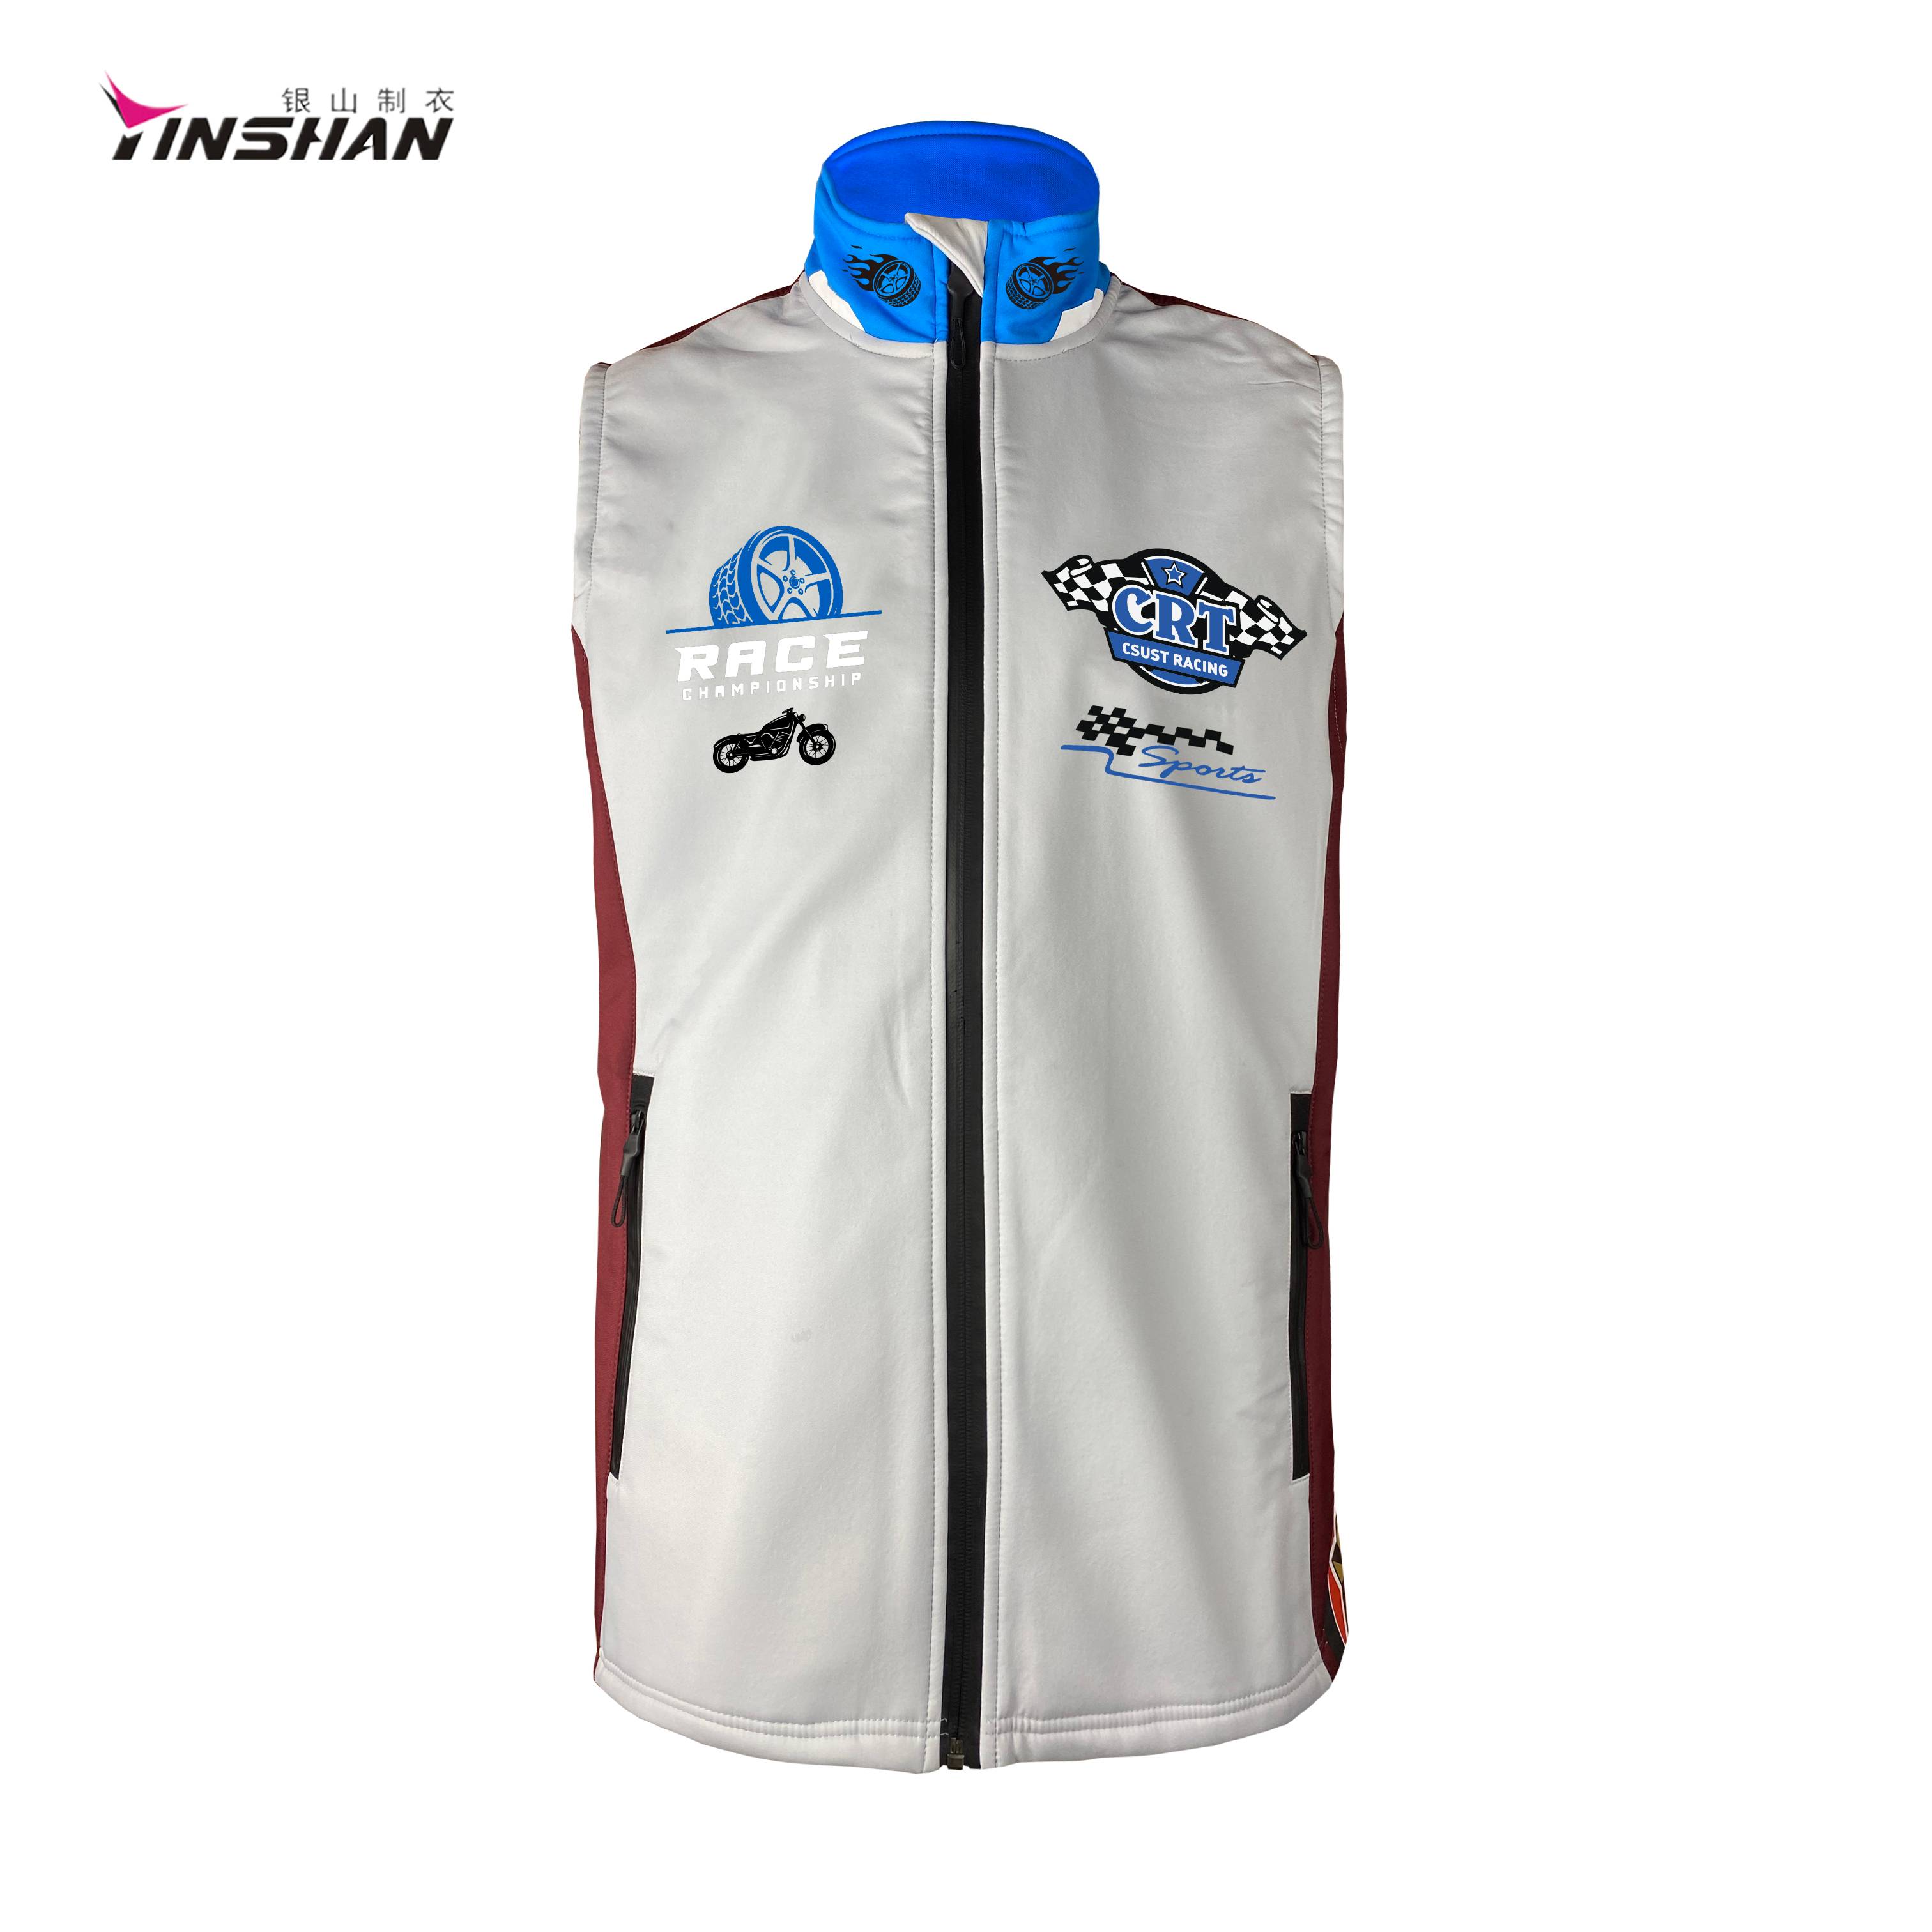 Customized Zipper Sports Vest with Embroidery and Printing For Horse Riding